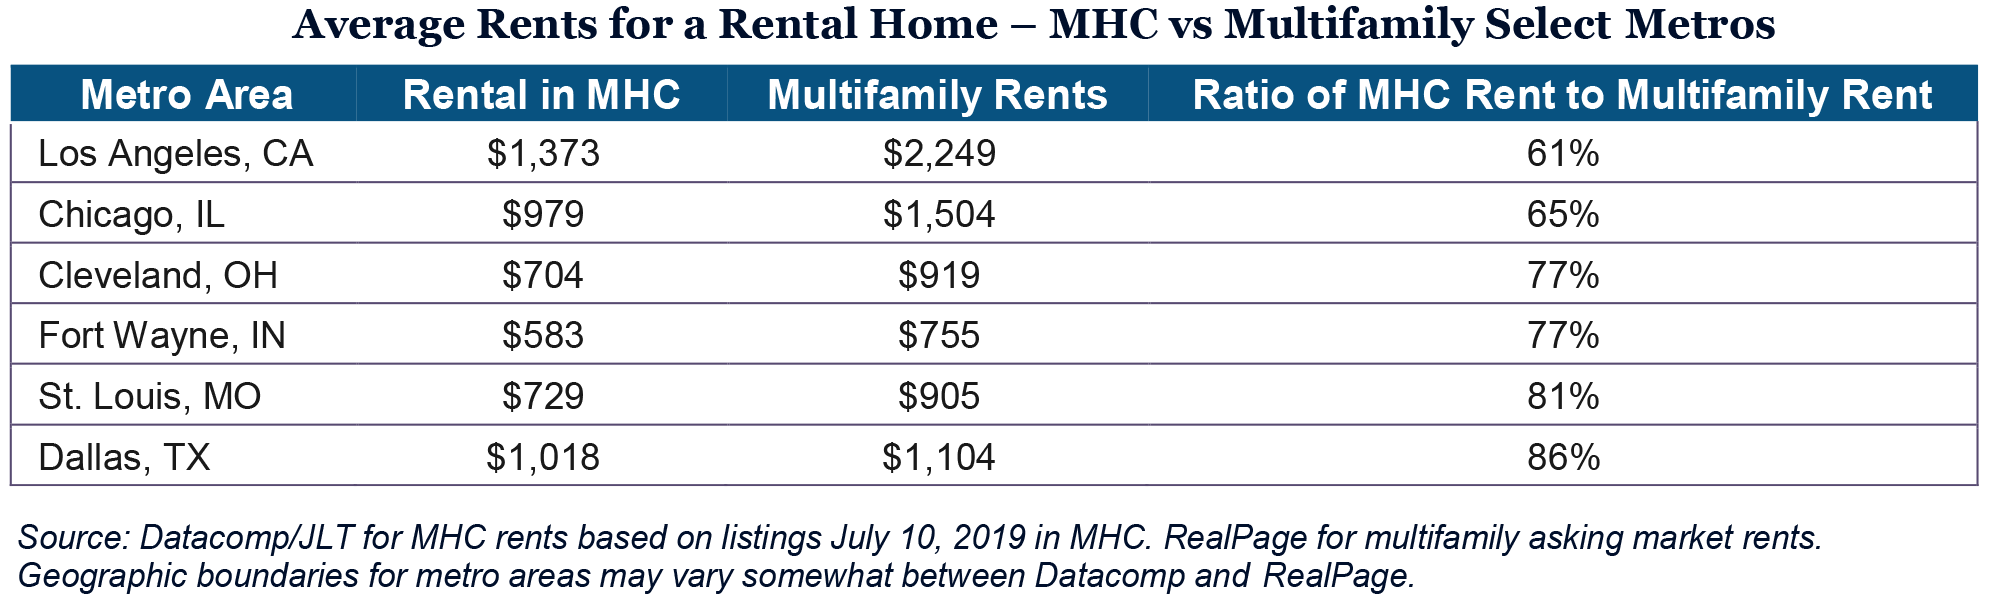 Average Rents for a Rental Home – MHC vs Multifamily Select Metros